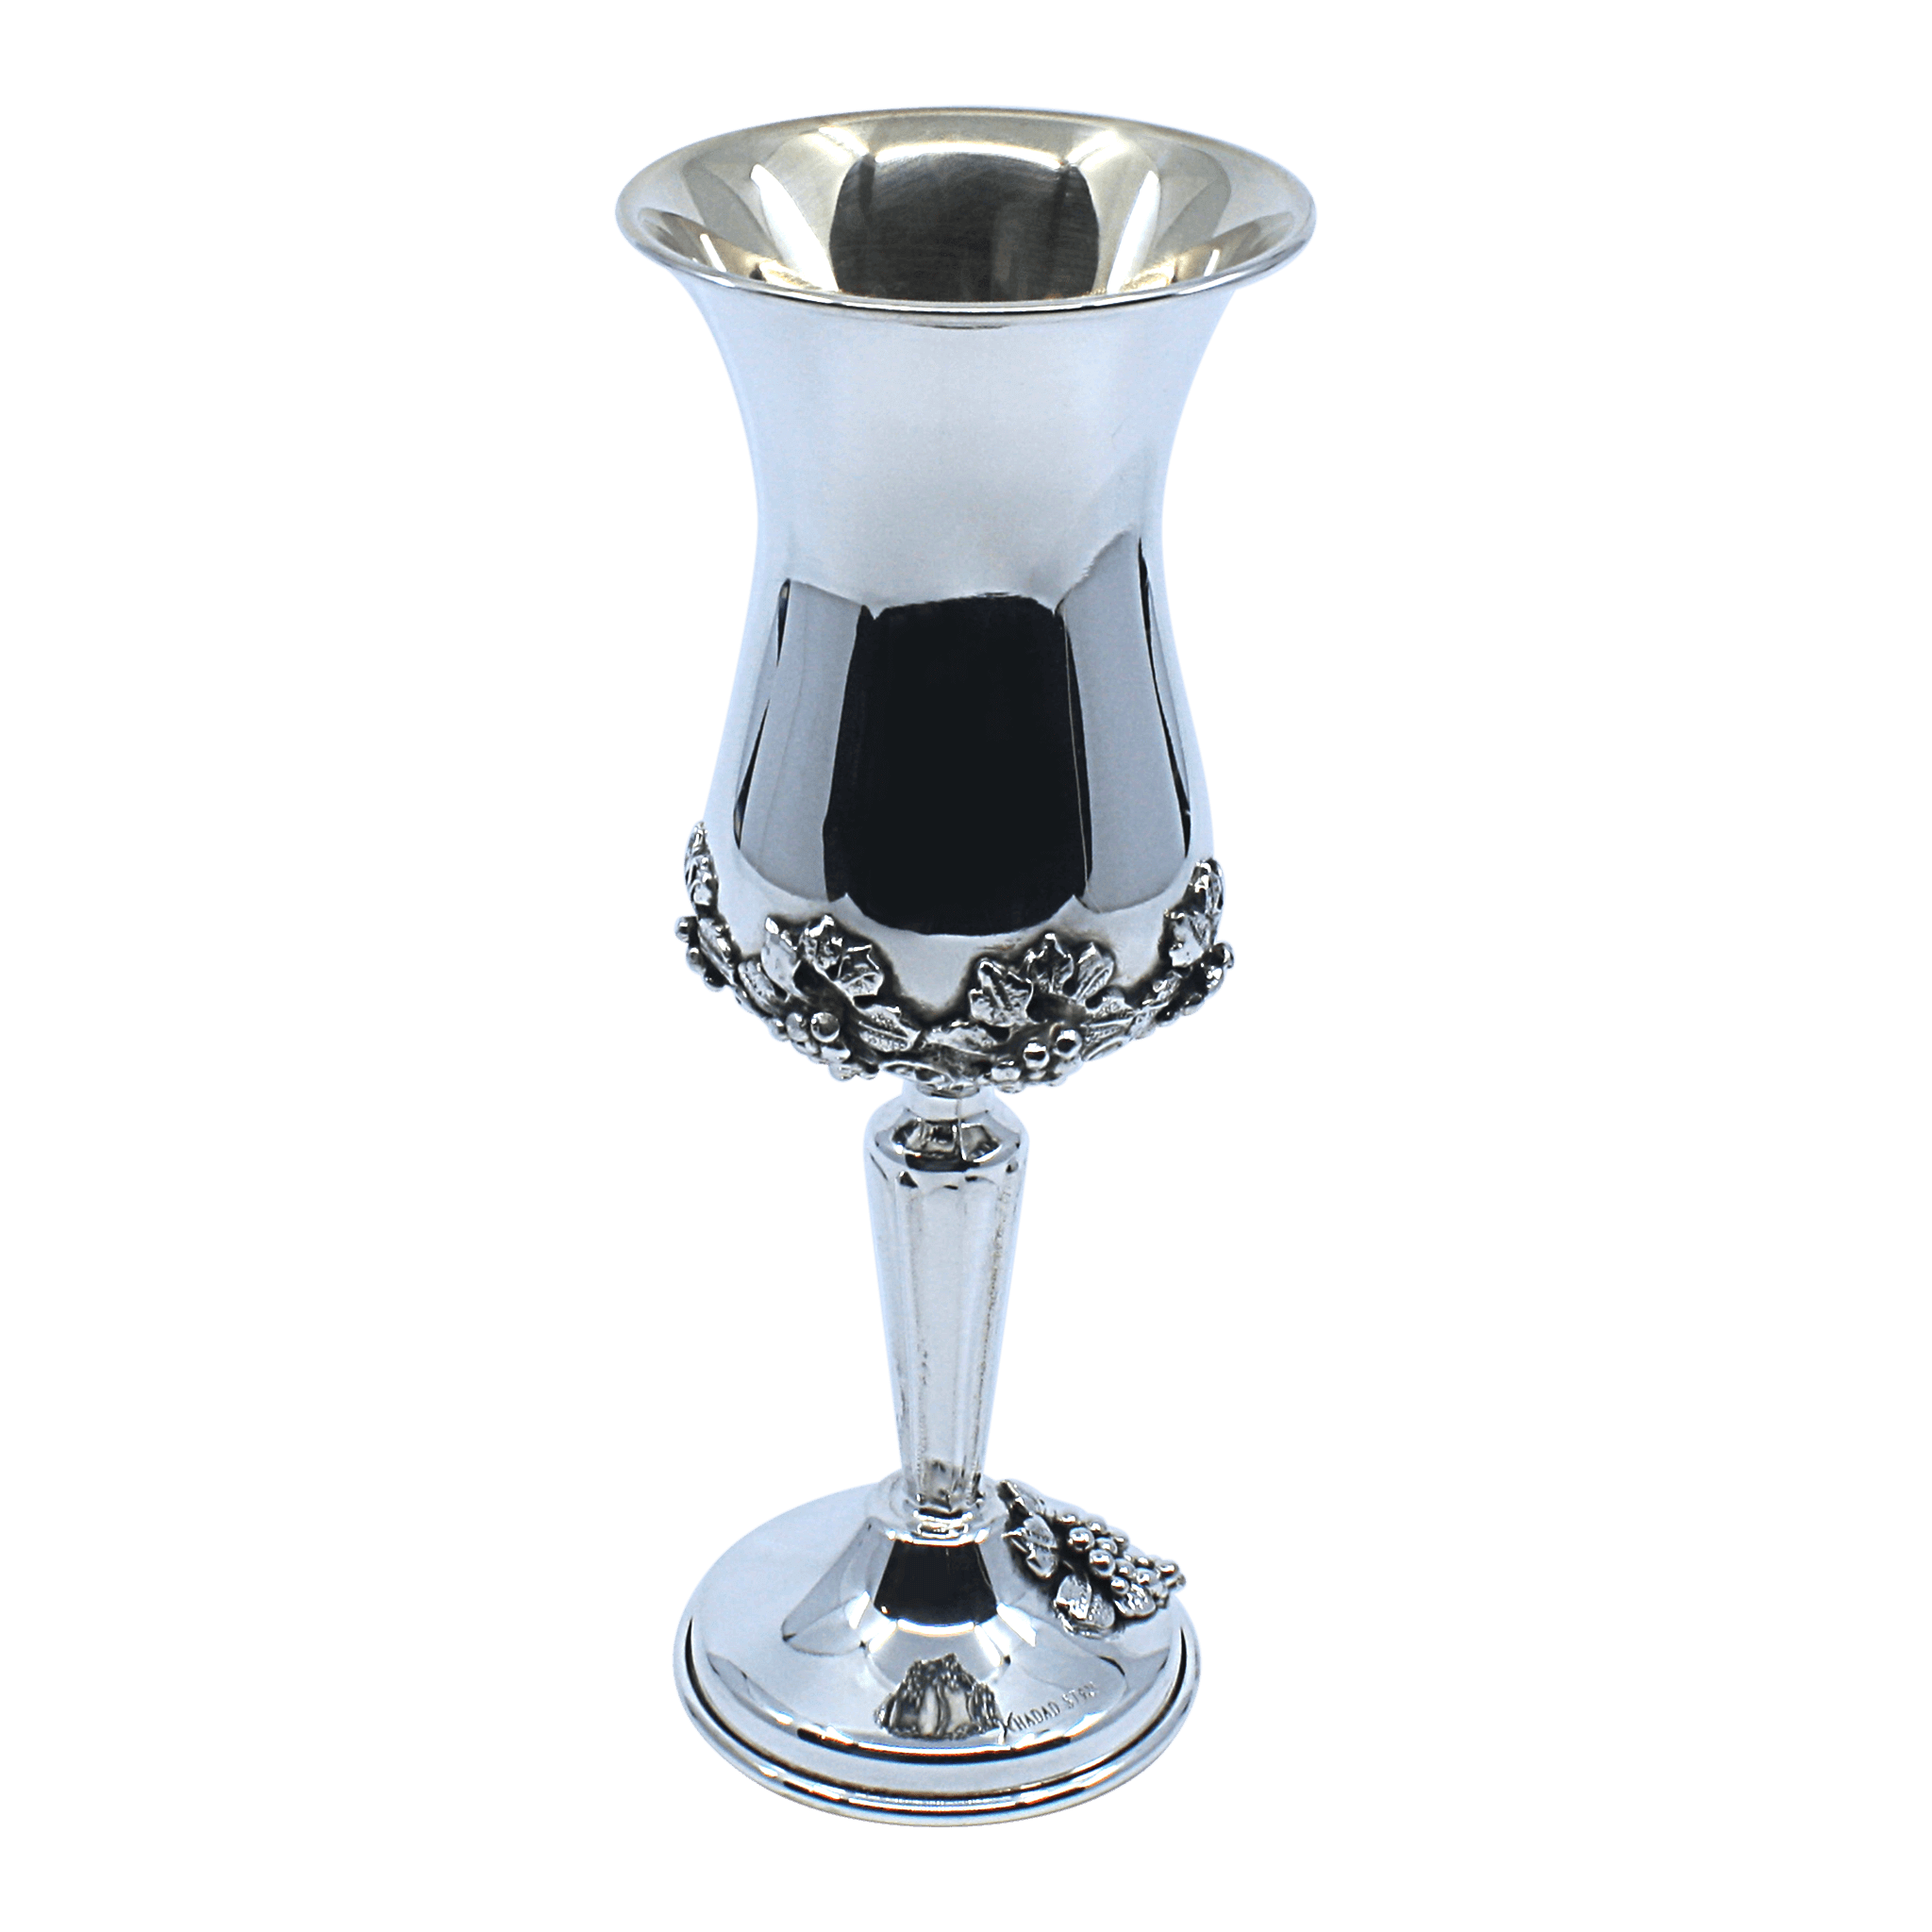 Sterling Silver Kiddush Goblet 6904 at $410.00 - Piece By Zion Hadad